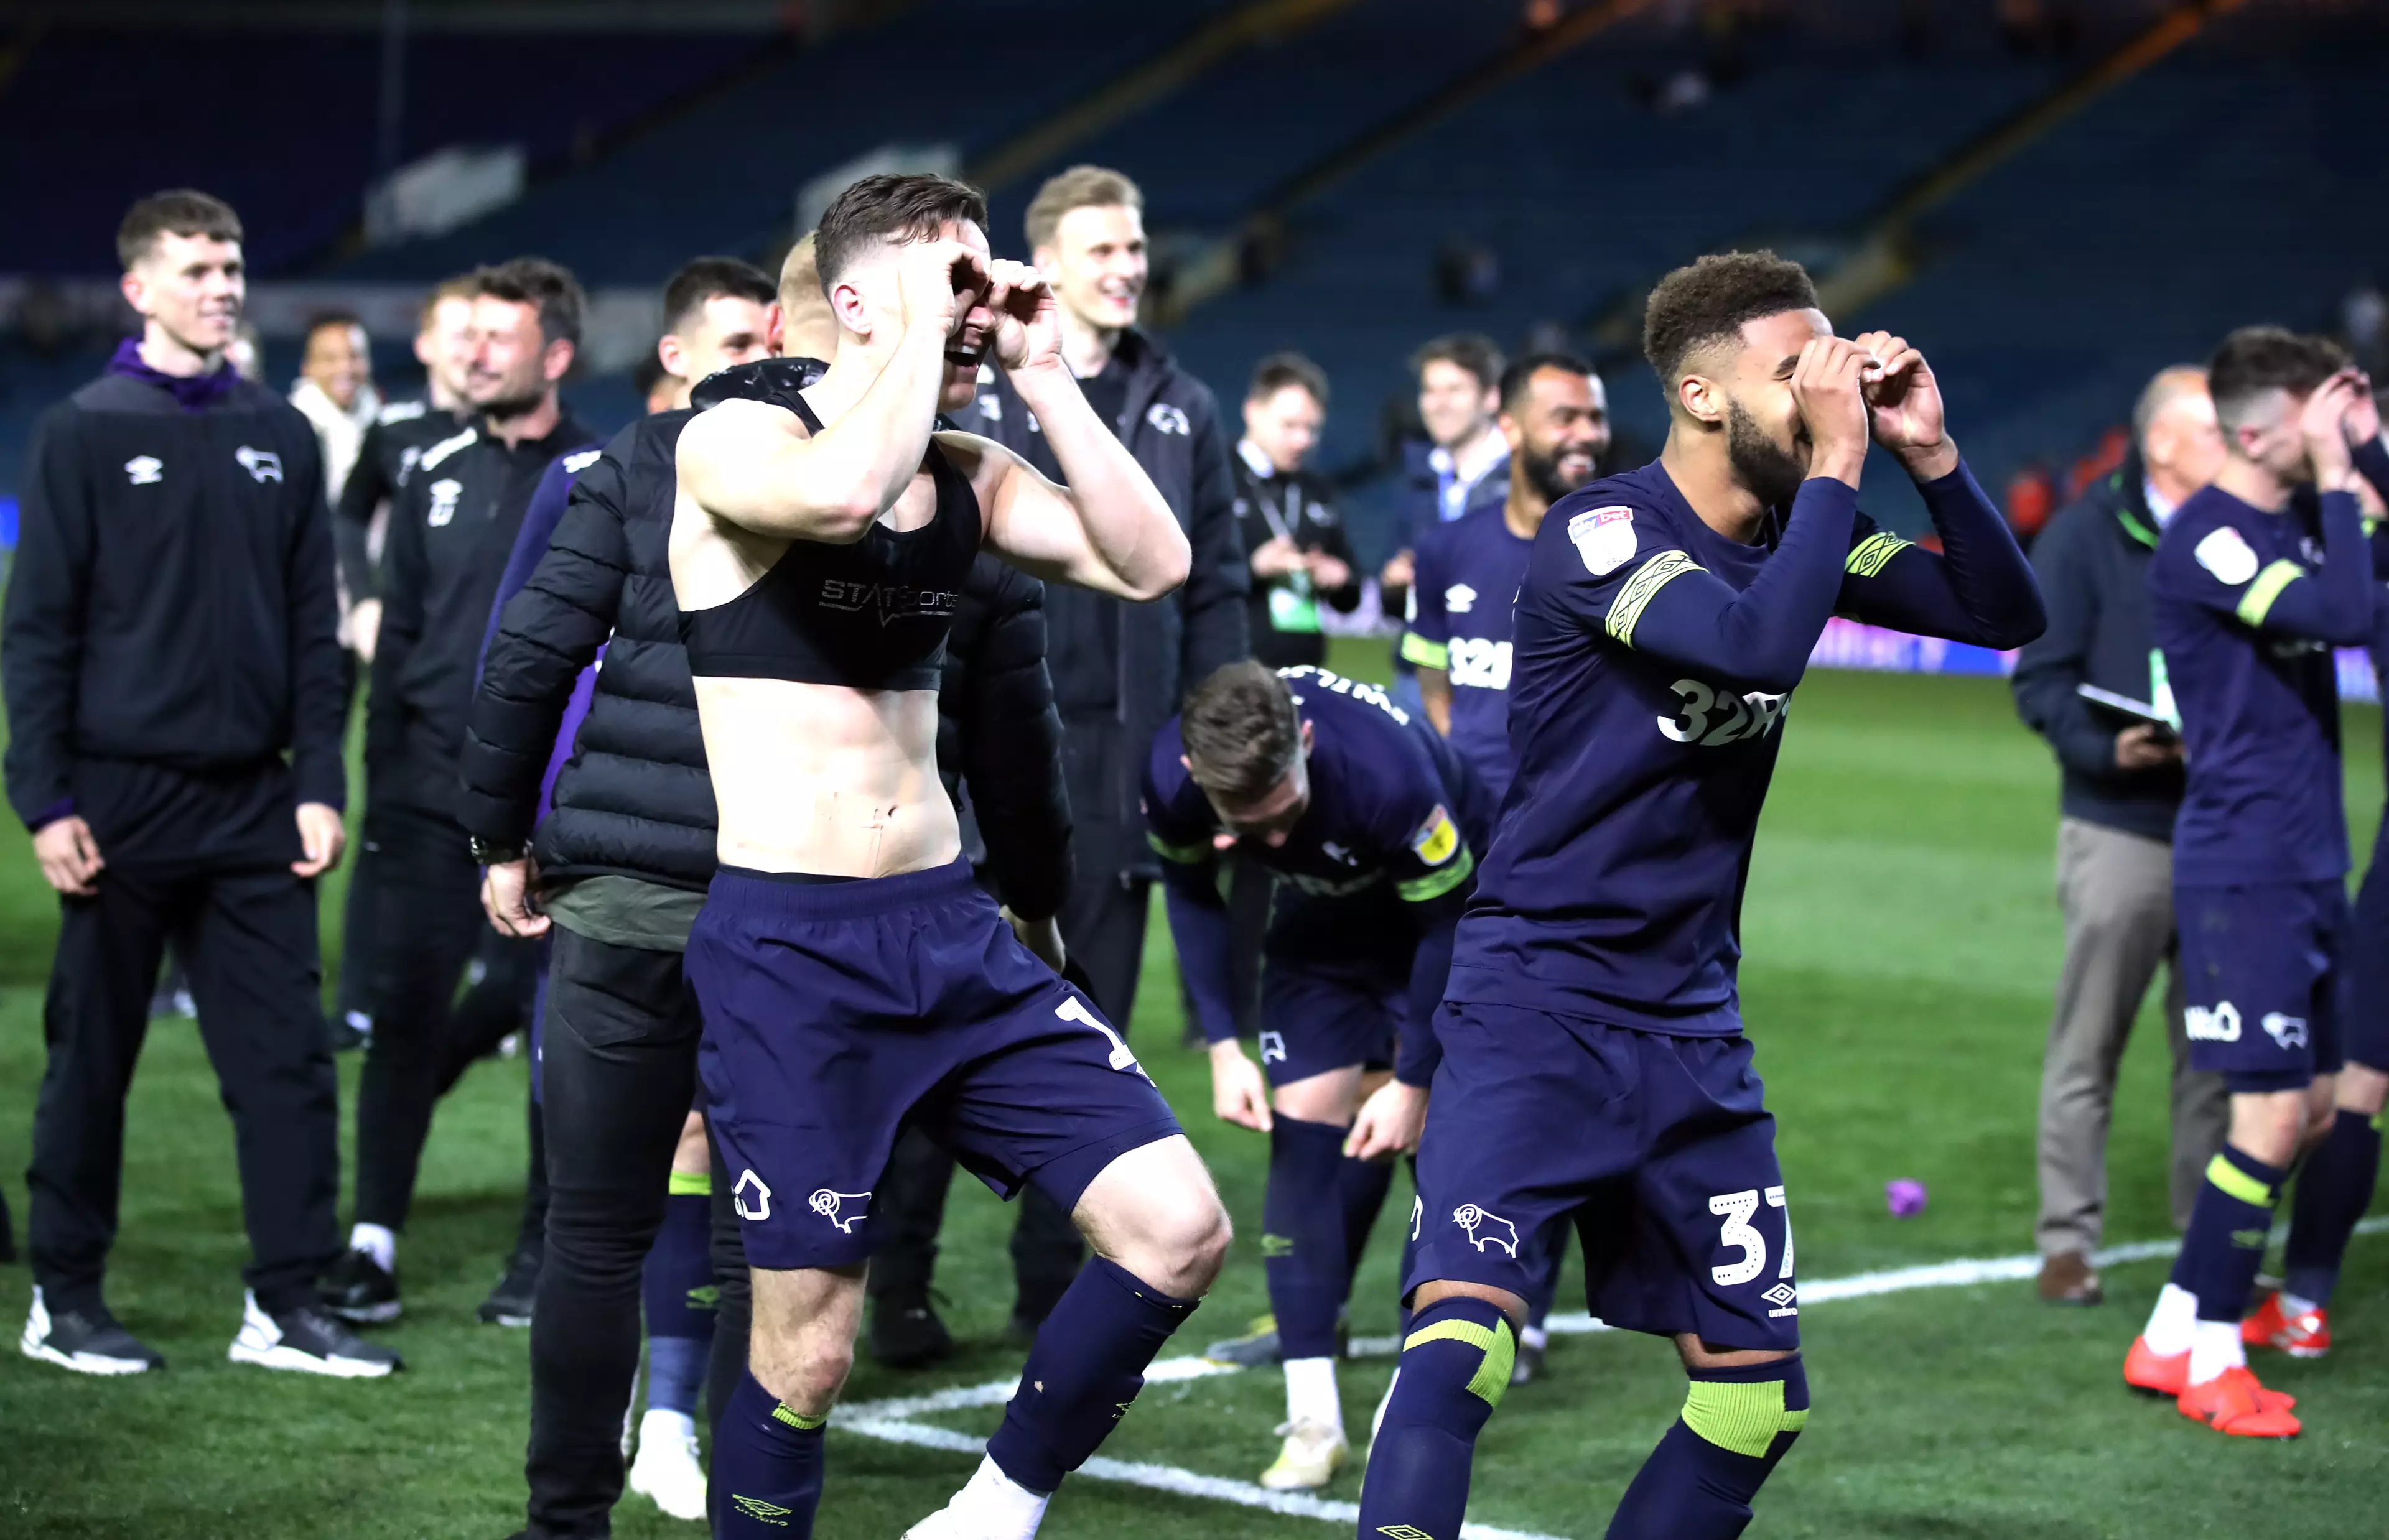 Derby County players mock 'Spygate' after winning in the play-offs. Image: PA Images